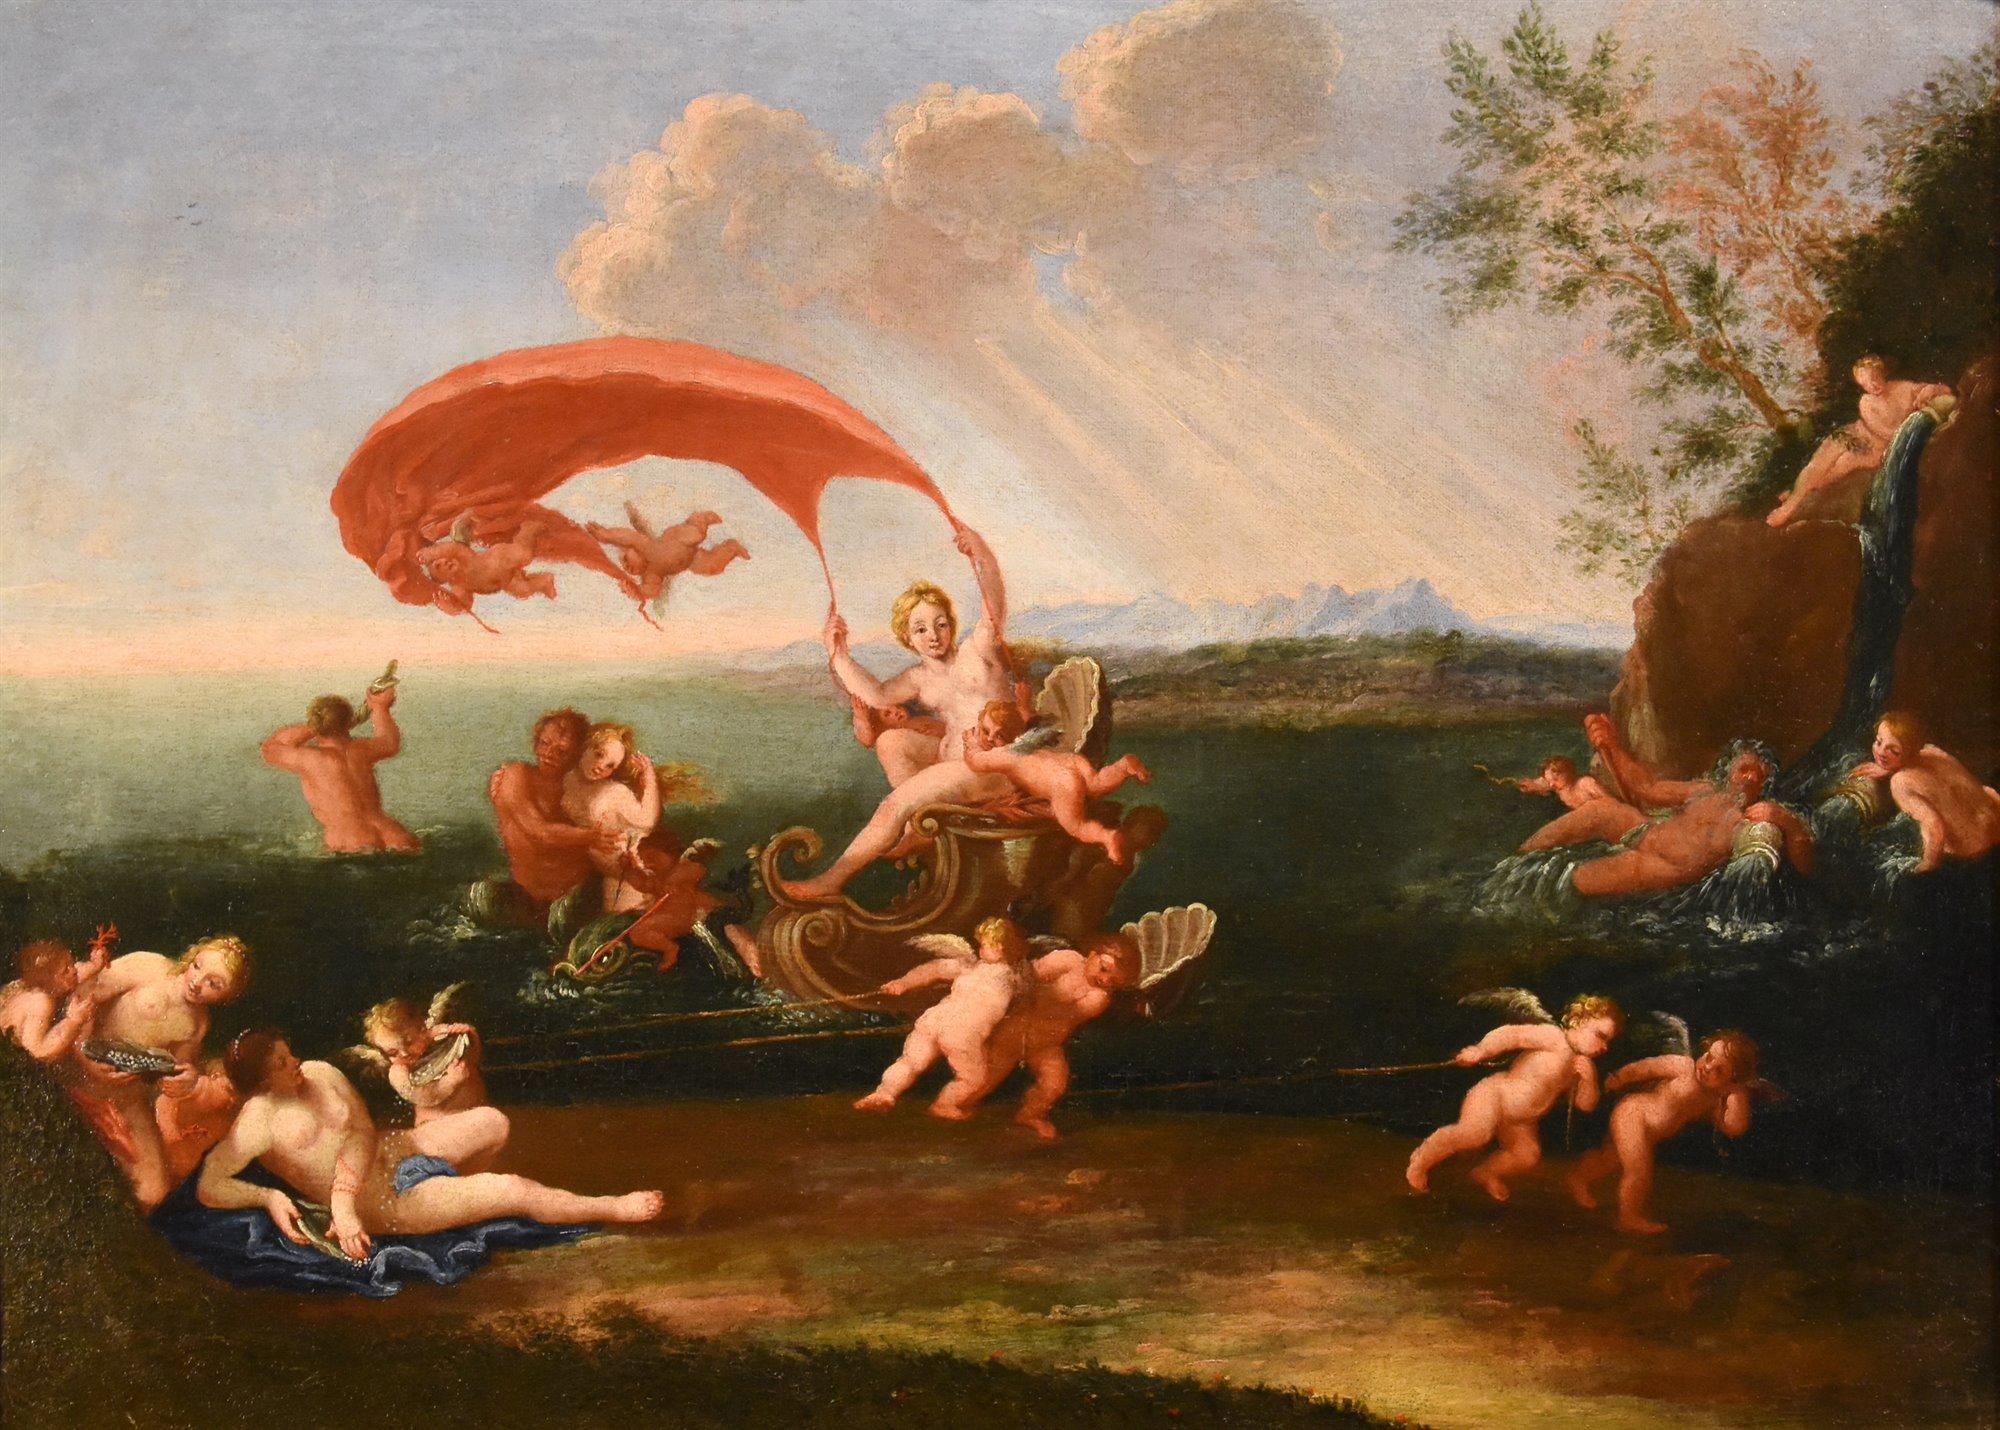 Galatea Nymph Albani Paint Oil on canvas Old master 17th Century Italy Art - Old Masters Painting by Francesco Albani (Bologna 1578 - 1660) Circle of